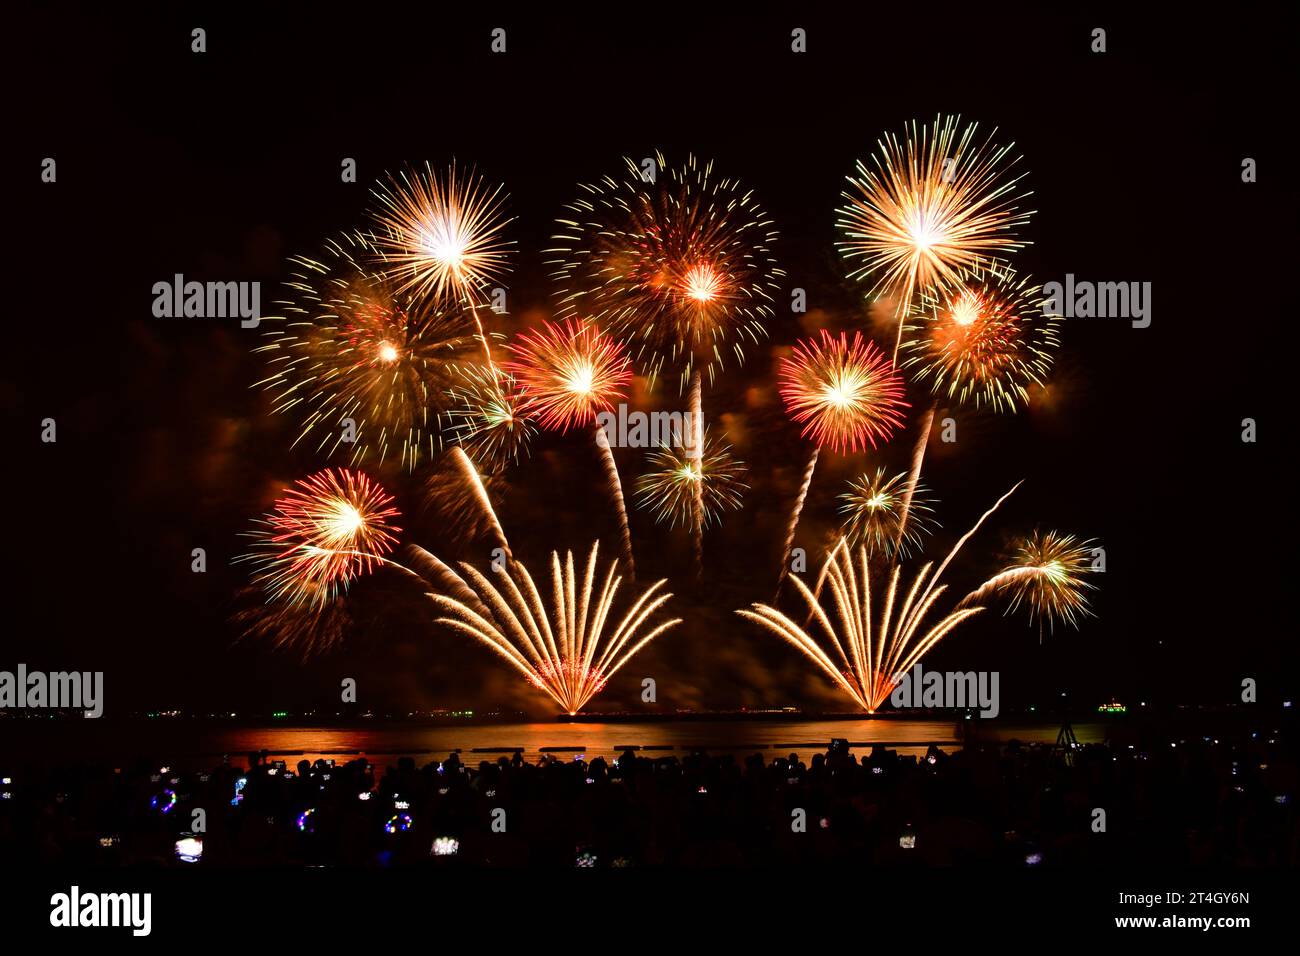 Joyful moment of people capturing fireworks show with camera and smart phone. Stock Photo